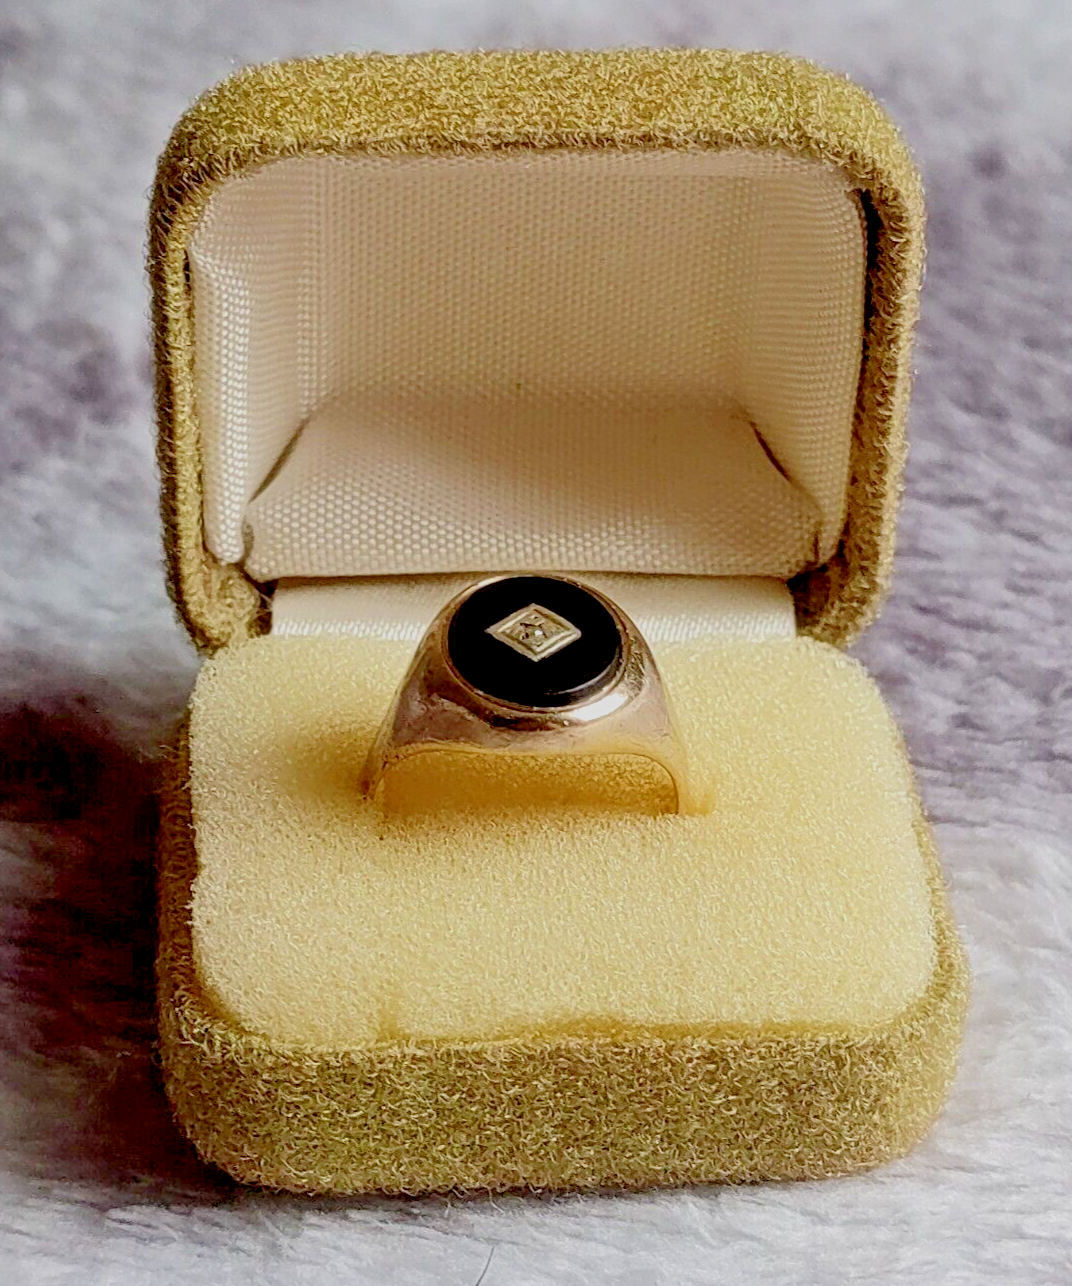 Mens Vintage 1978 9 Carat Gold Onyx Oval Set Signet Ring with Diamond Chip - N½